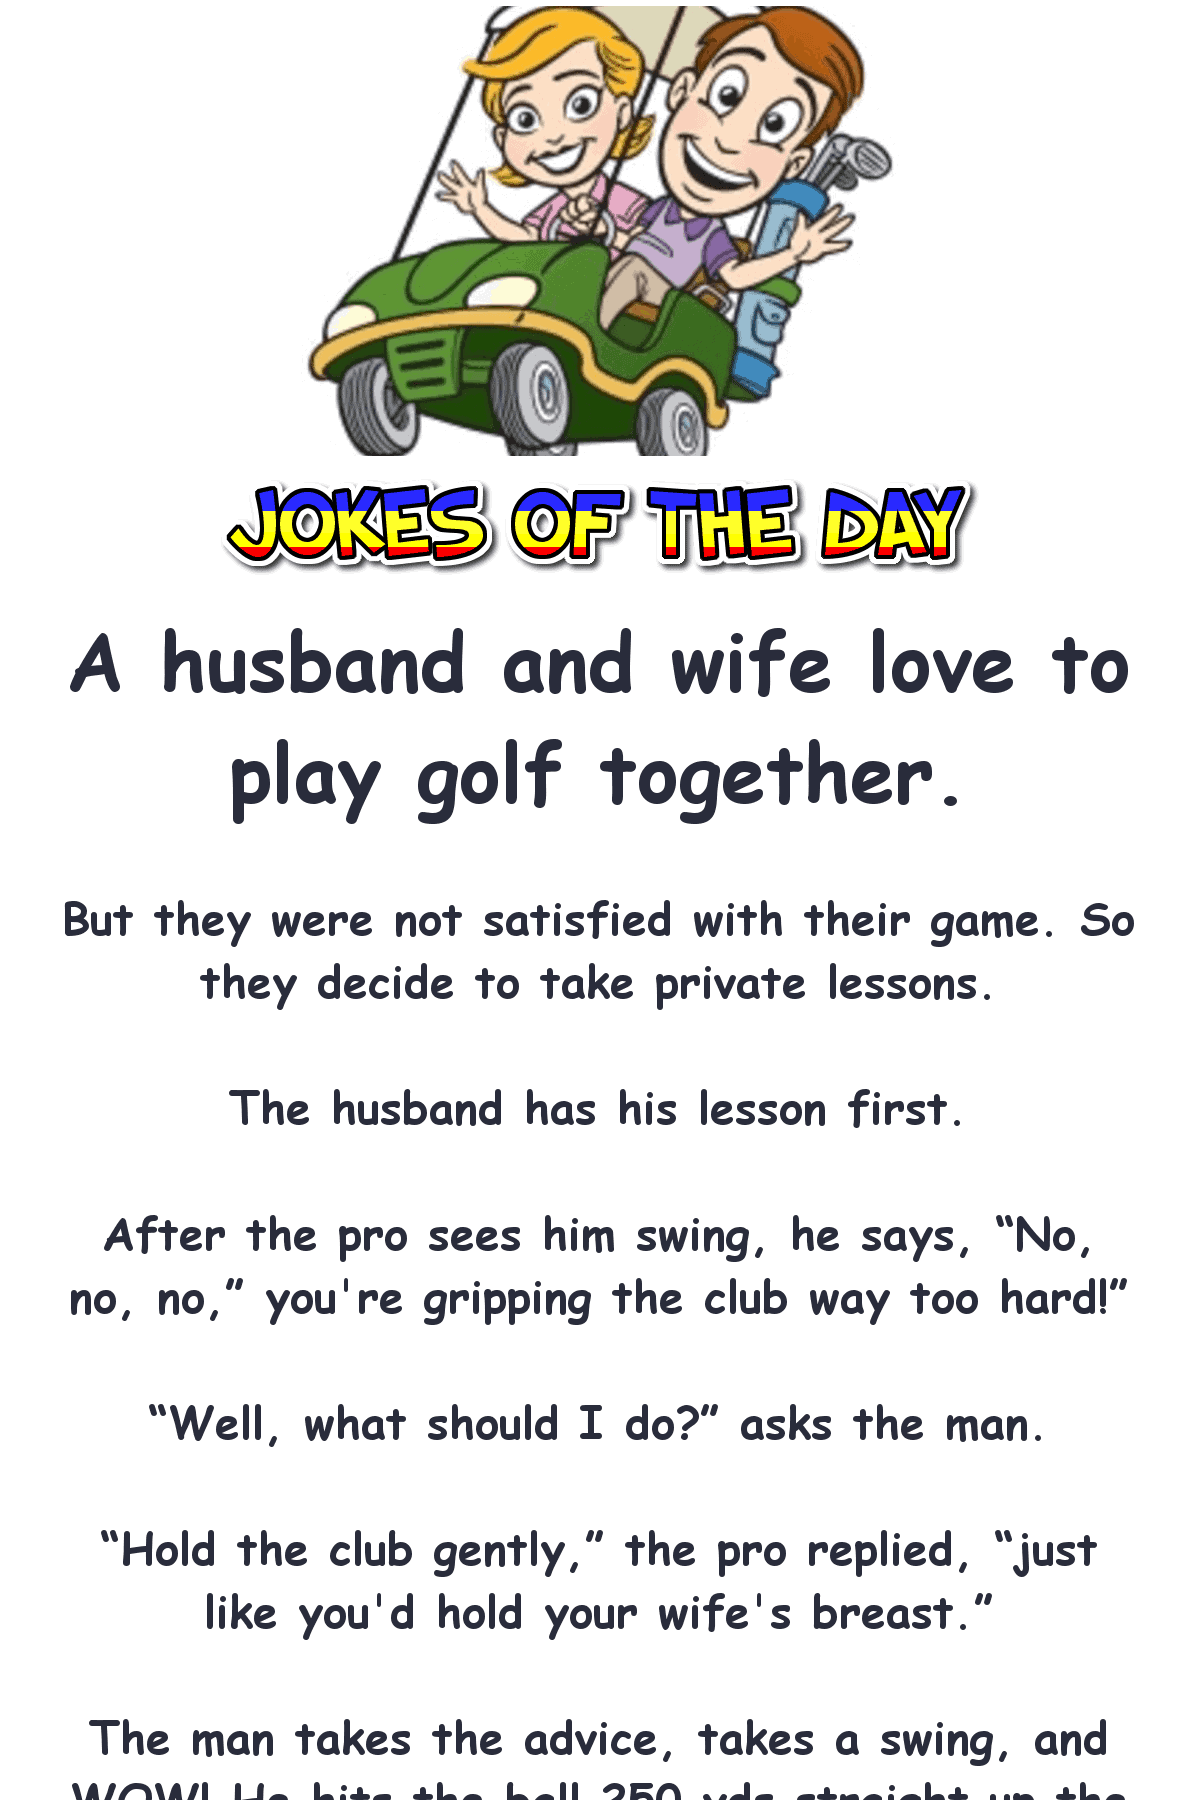 Dirty joke - a husband and wife love to play golf together